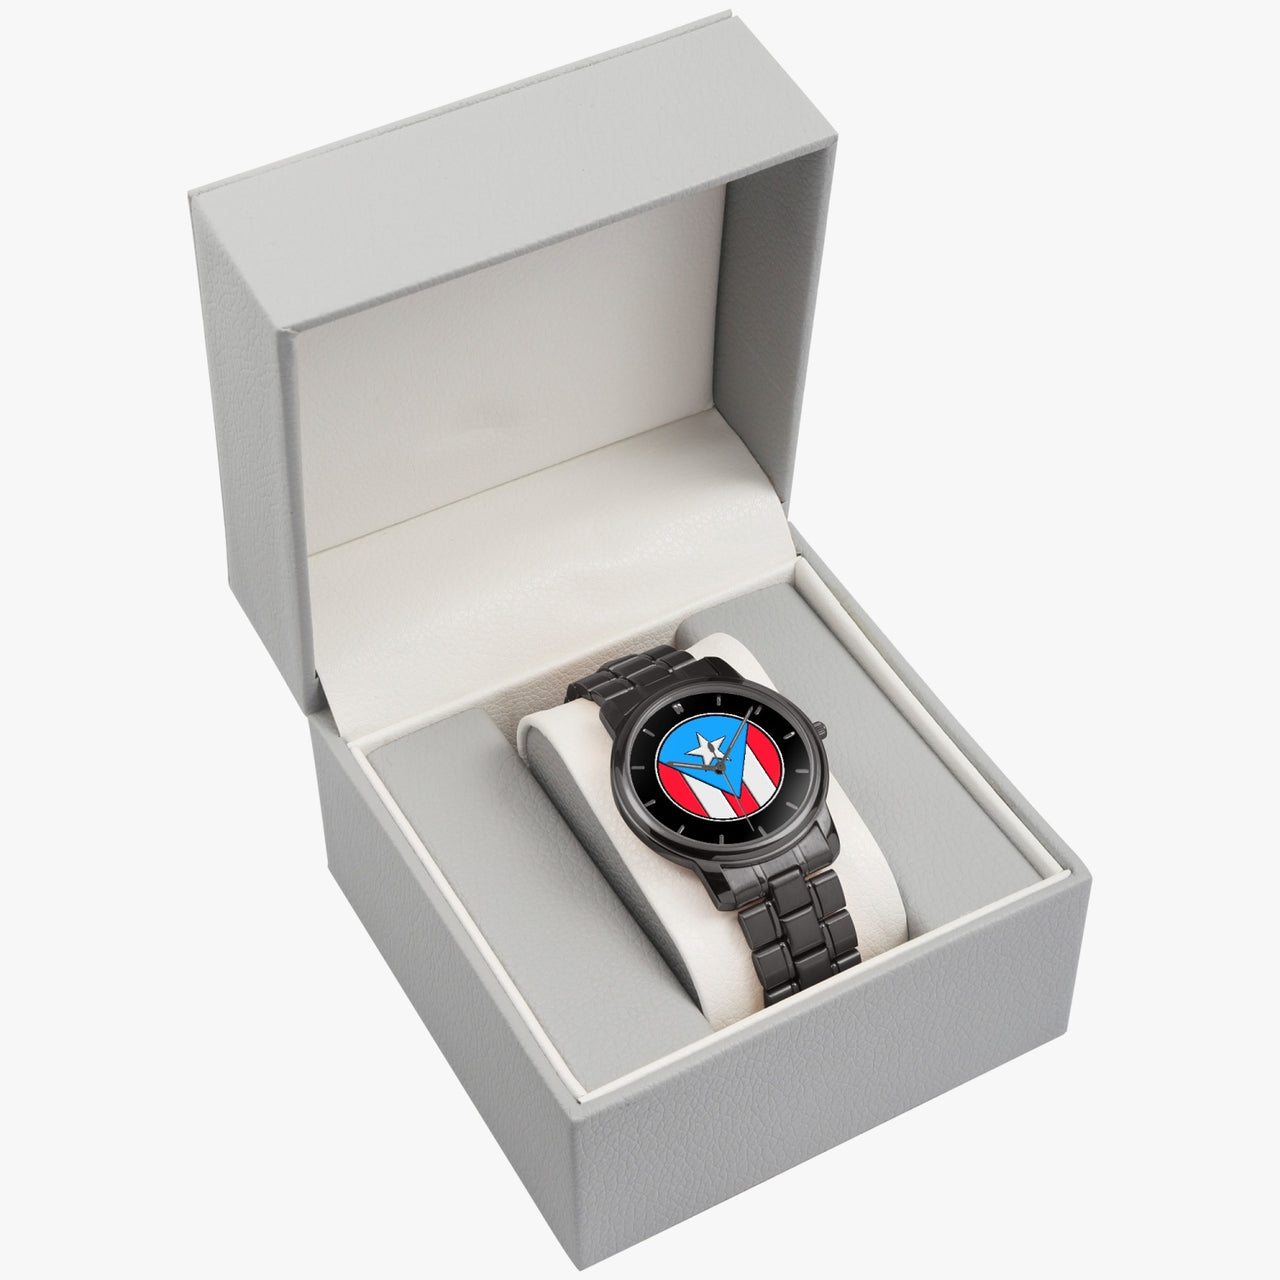 Puerto Rico Flag Folding Clasp Type Stainless Steel Quartz Watch (With Indicators)